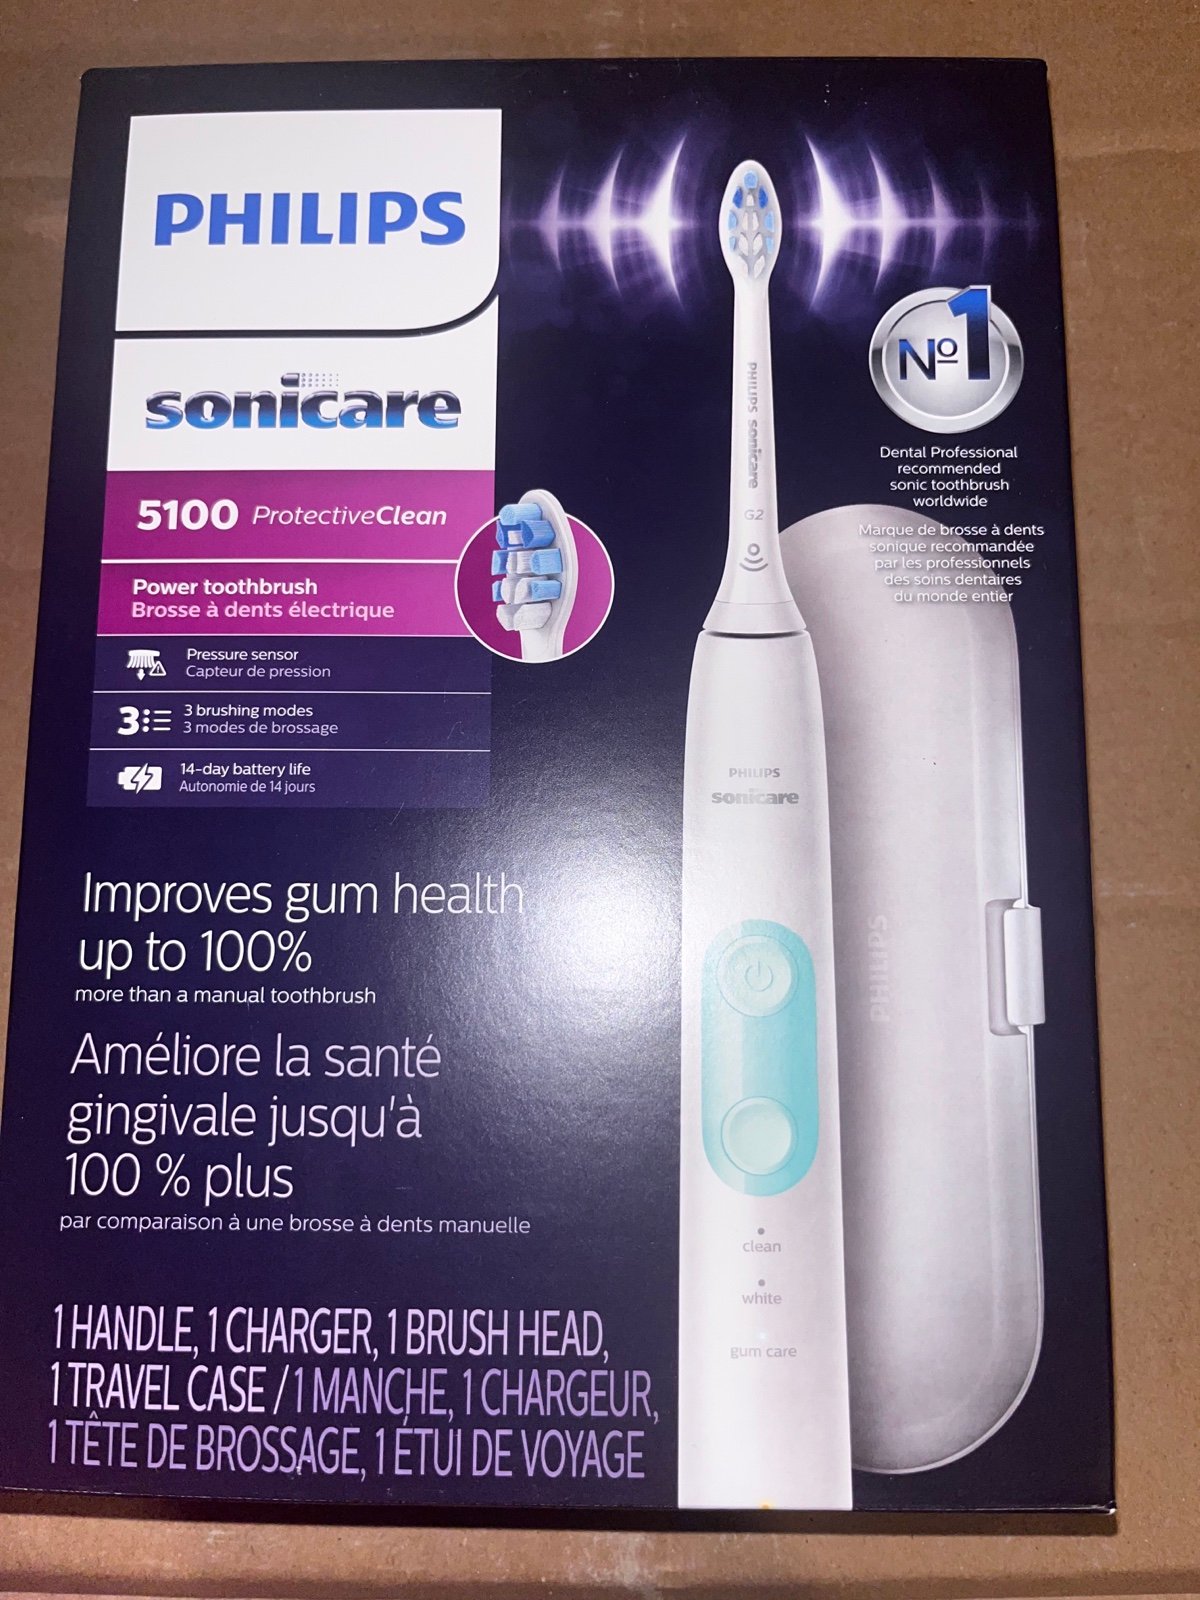 Philips Sonicare Protective Clean 5100 Rechargeable Electric Toothbrush - White fYGLeSsYE